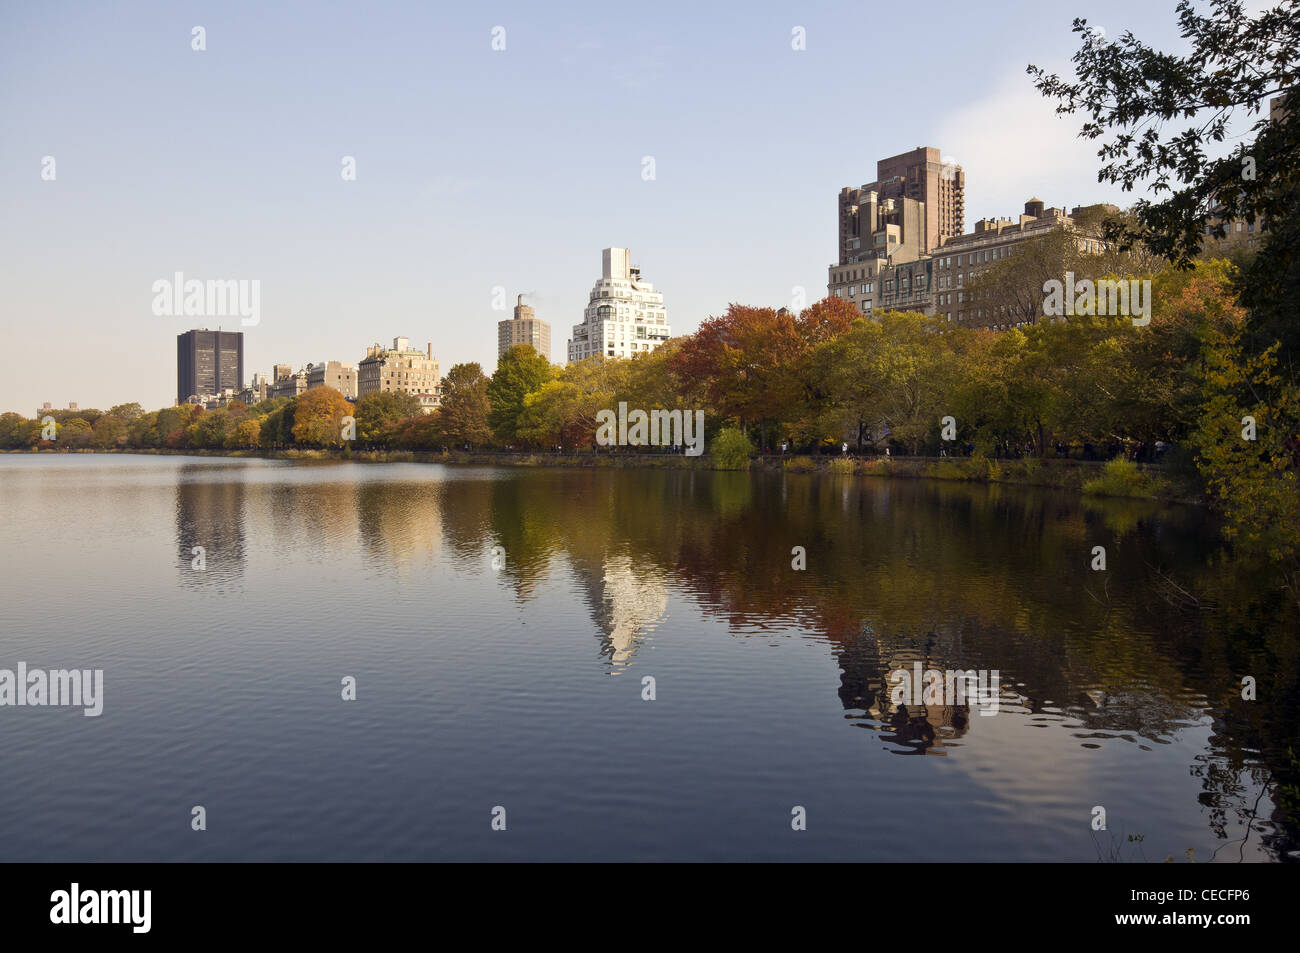 Belvedere Lake in autumn looking towards the architecture on 5th Avenue next to Central Park, New York, USA Stock Photo